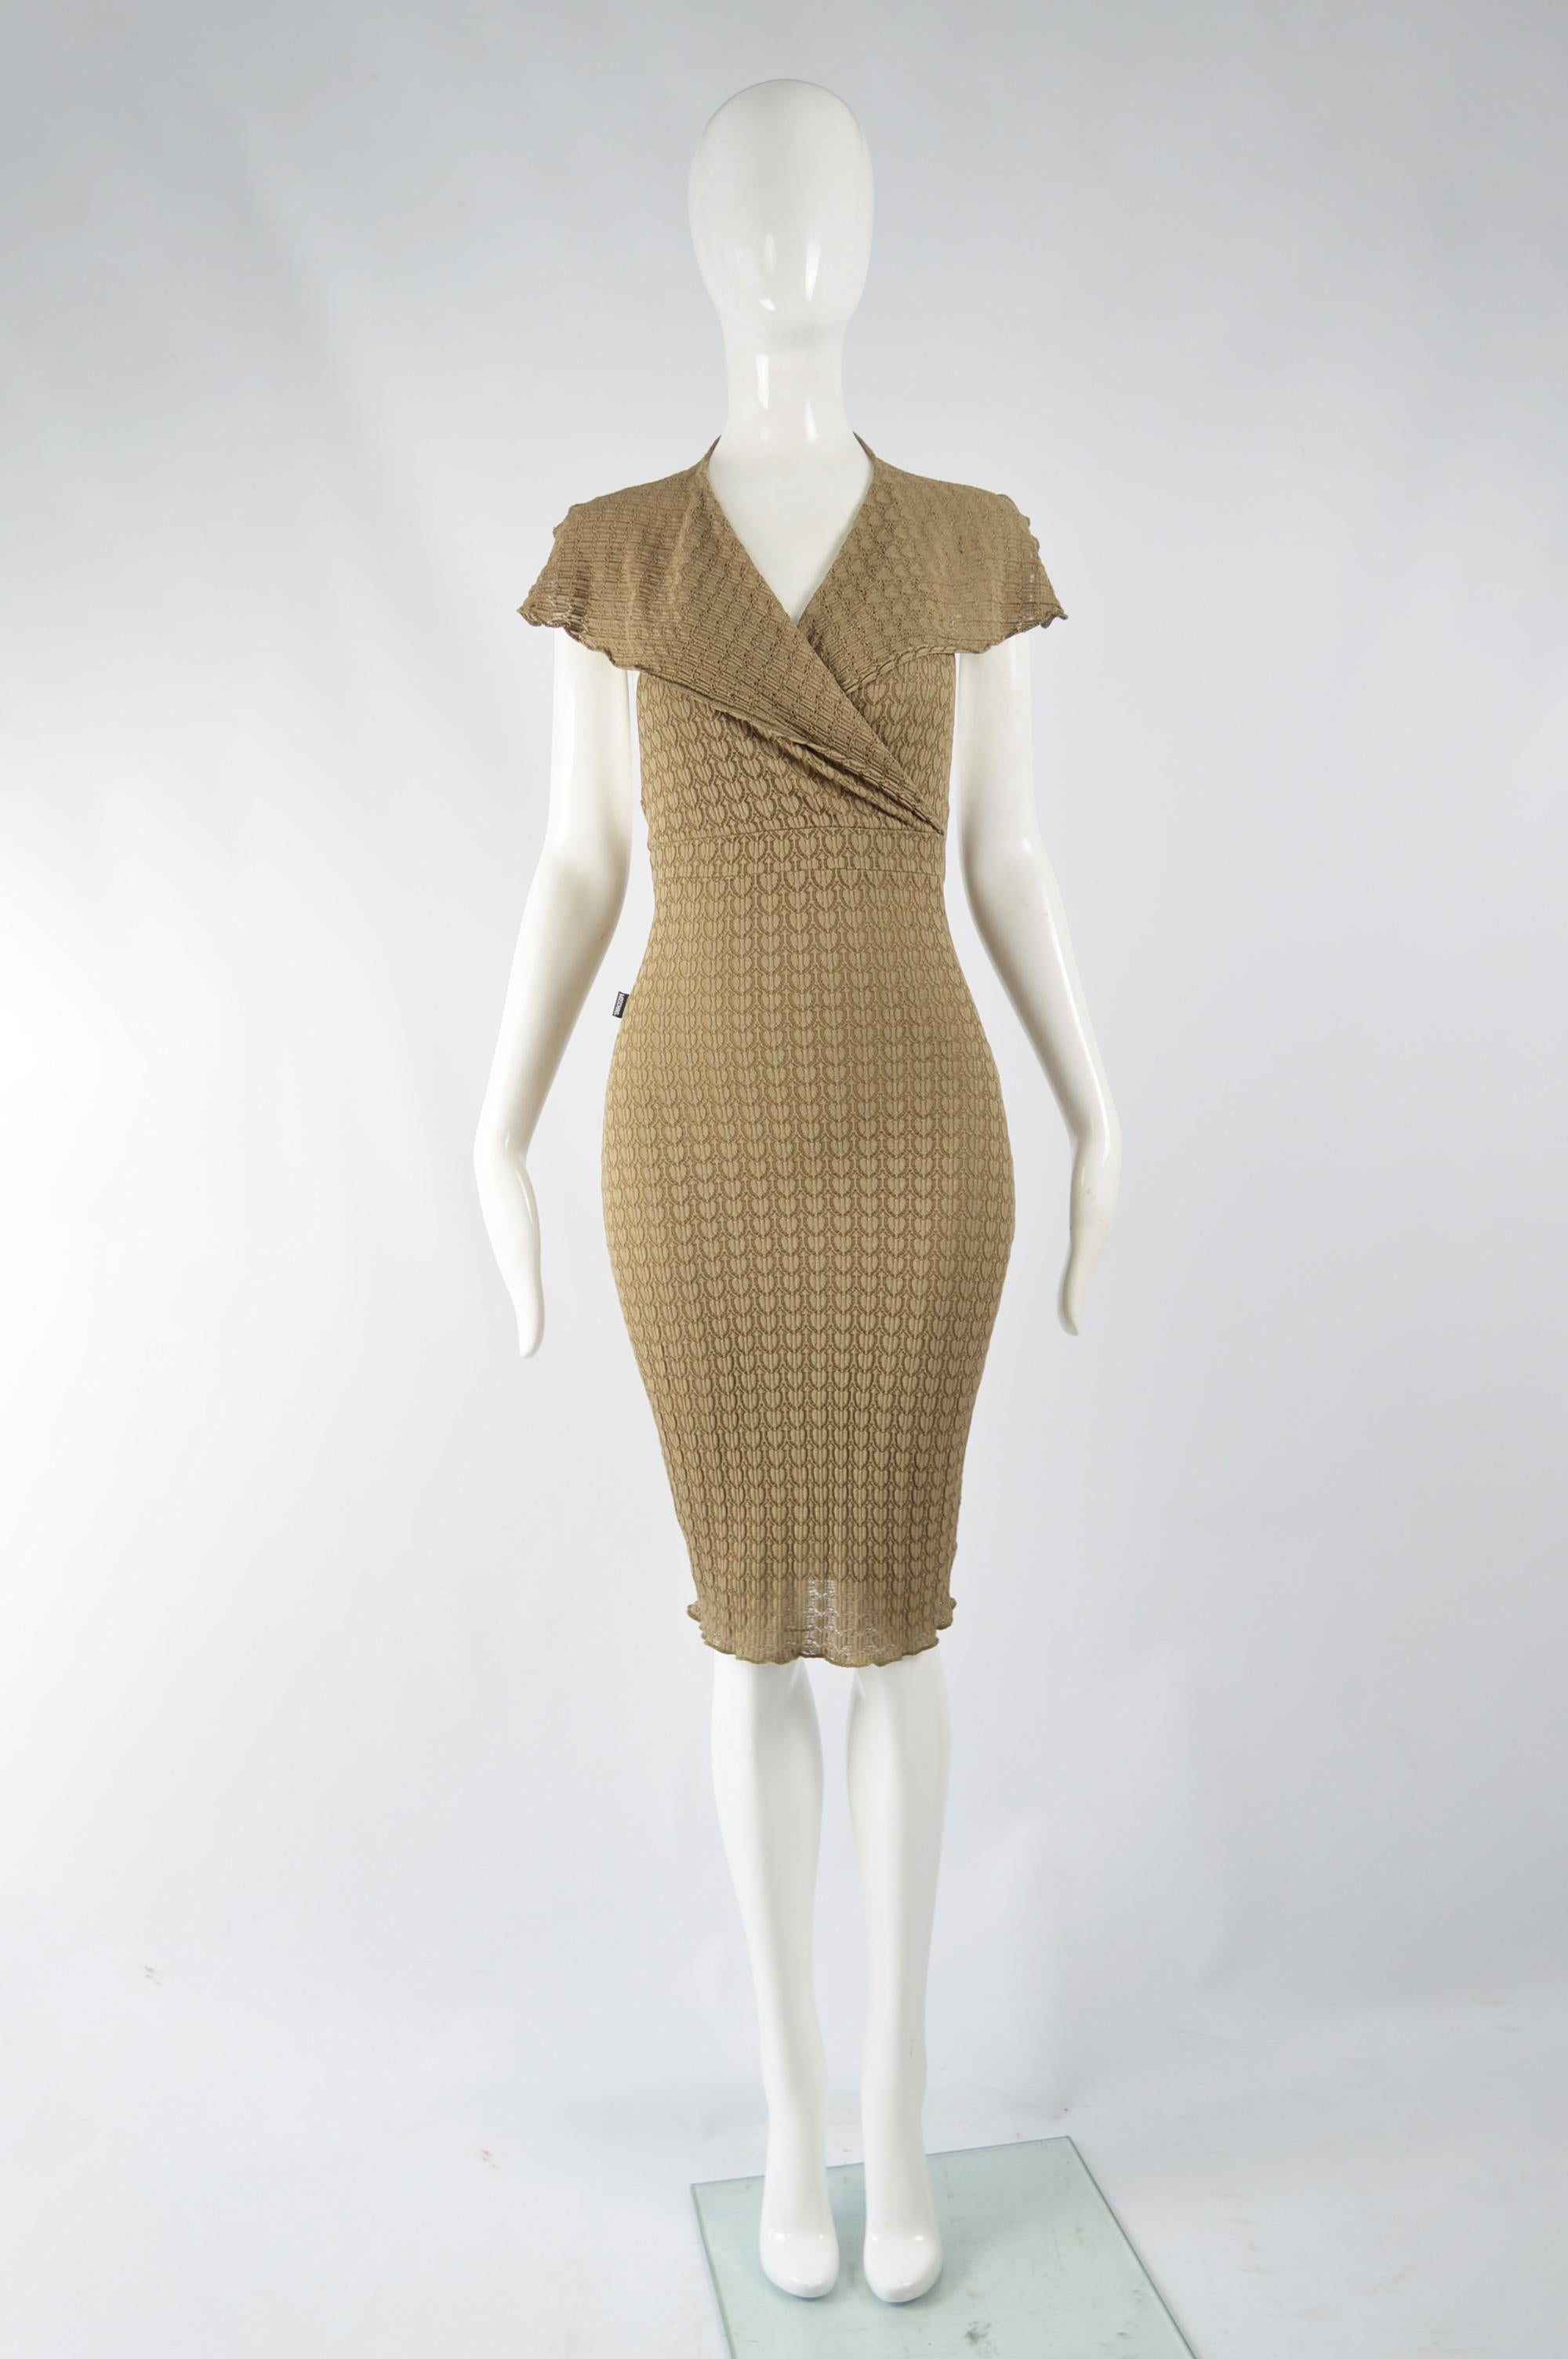 A fabulous vintage womens Moschino bodycon dress from the 90s. In a brown, stretch crochet / knit fabric in the shape of little hearts with an interesting crossover front and backless design.  Perfect for a party. 

Size: Marked I 40 / US 6 / F 36 /